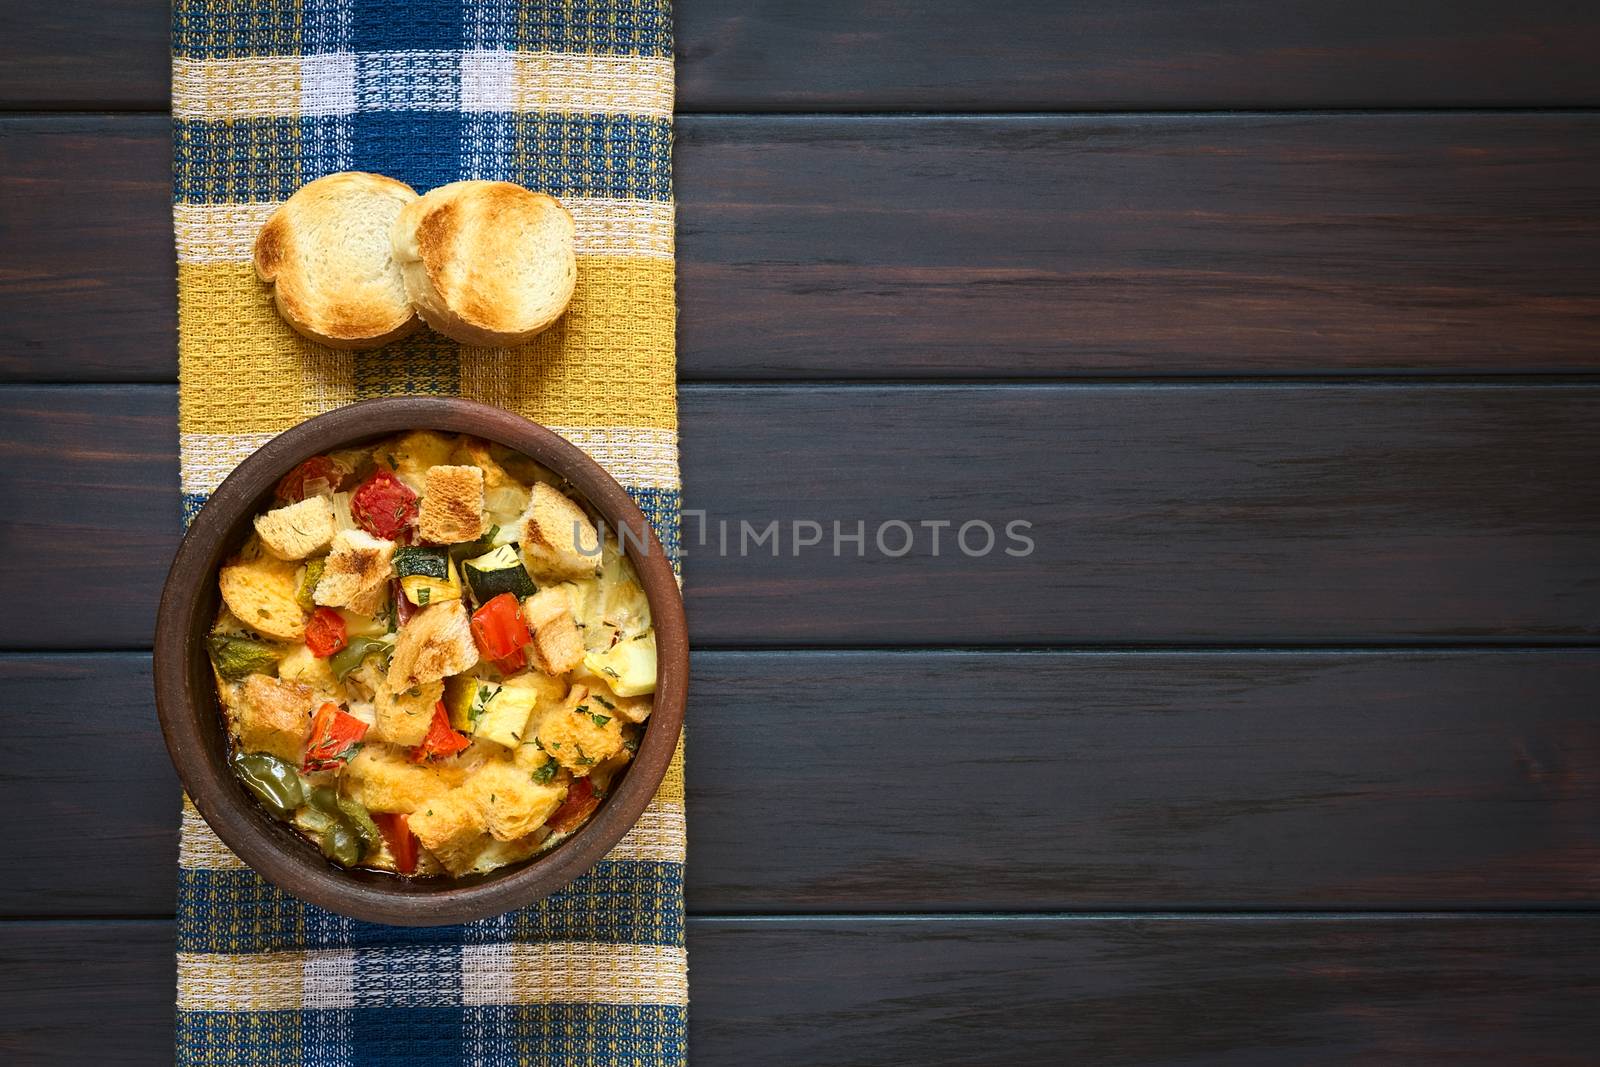 Overhead shot of savory baked vegetarian bread pudding made of zucchini, bell pepper, tomato and diced baguette, seasoned with thyme and parsley in rustic bowl, with two toasted baguette slices on kitchen towel, photographed on dark wood with natural light